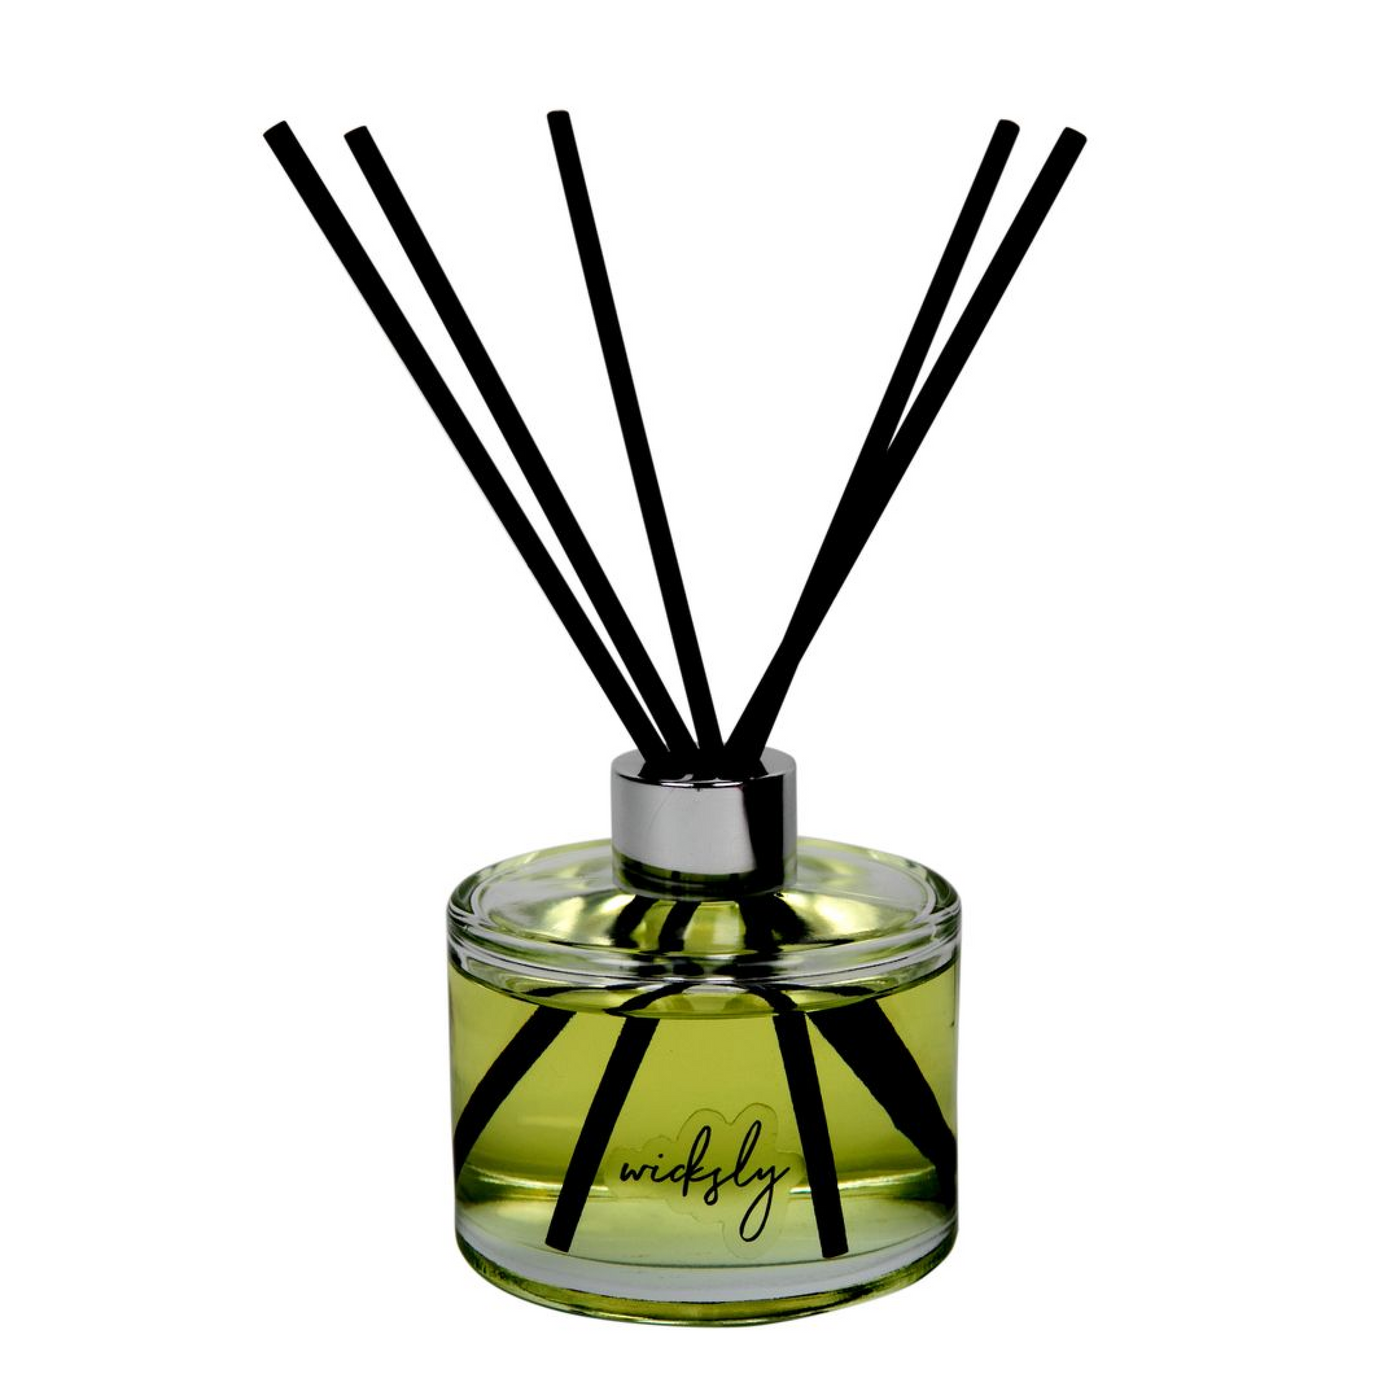 Wicksly Reed Diffuser 6 Month Pre-Pay